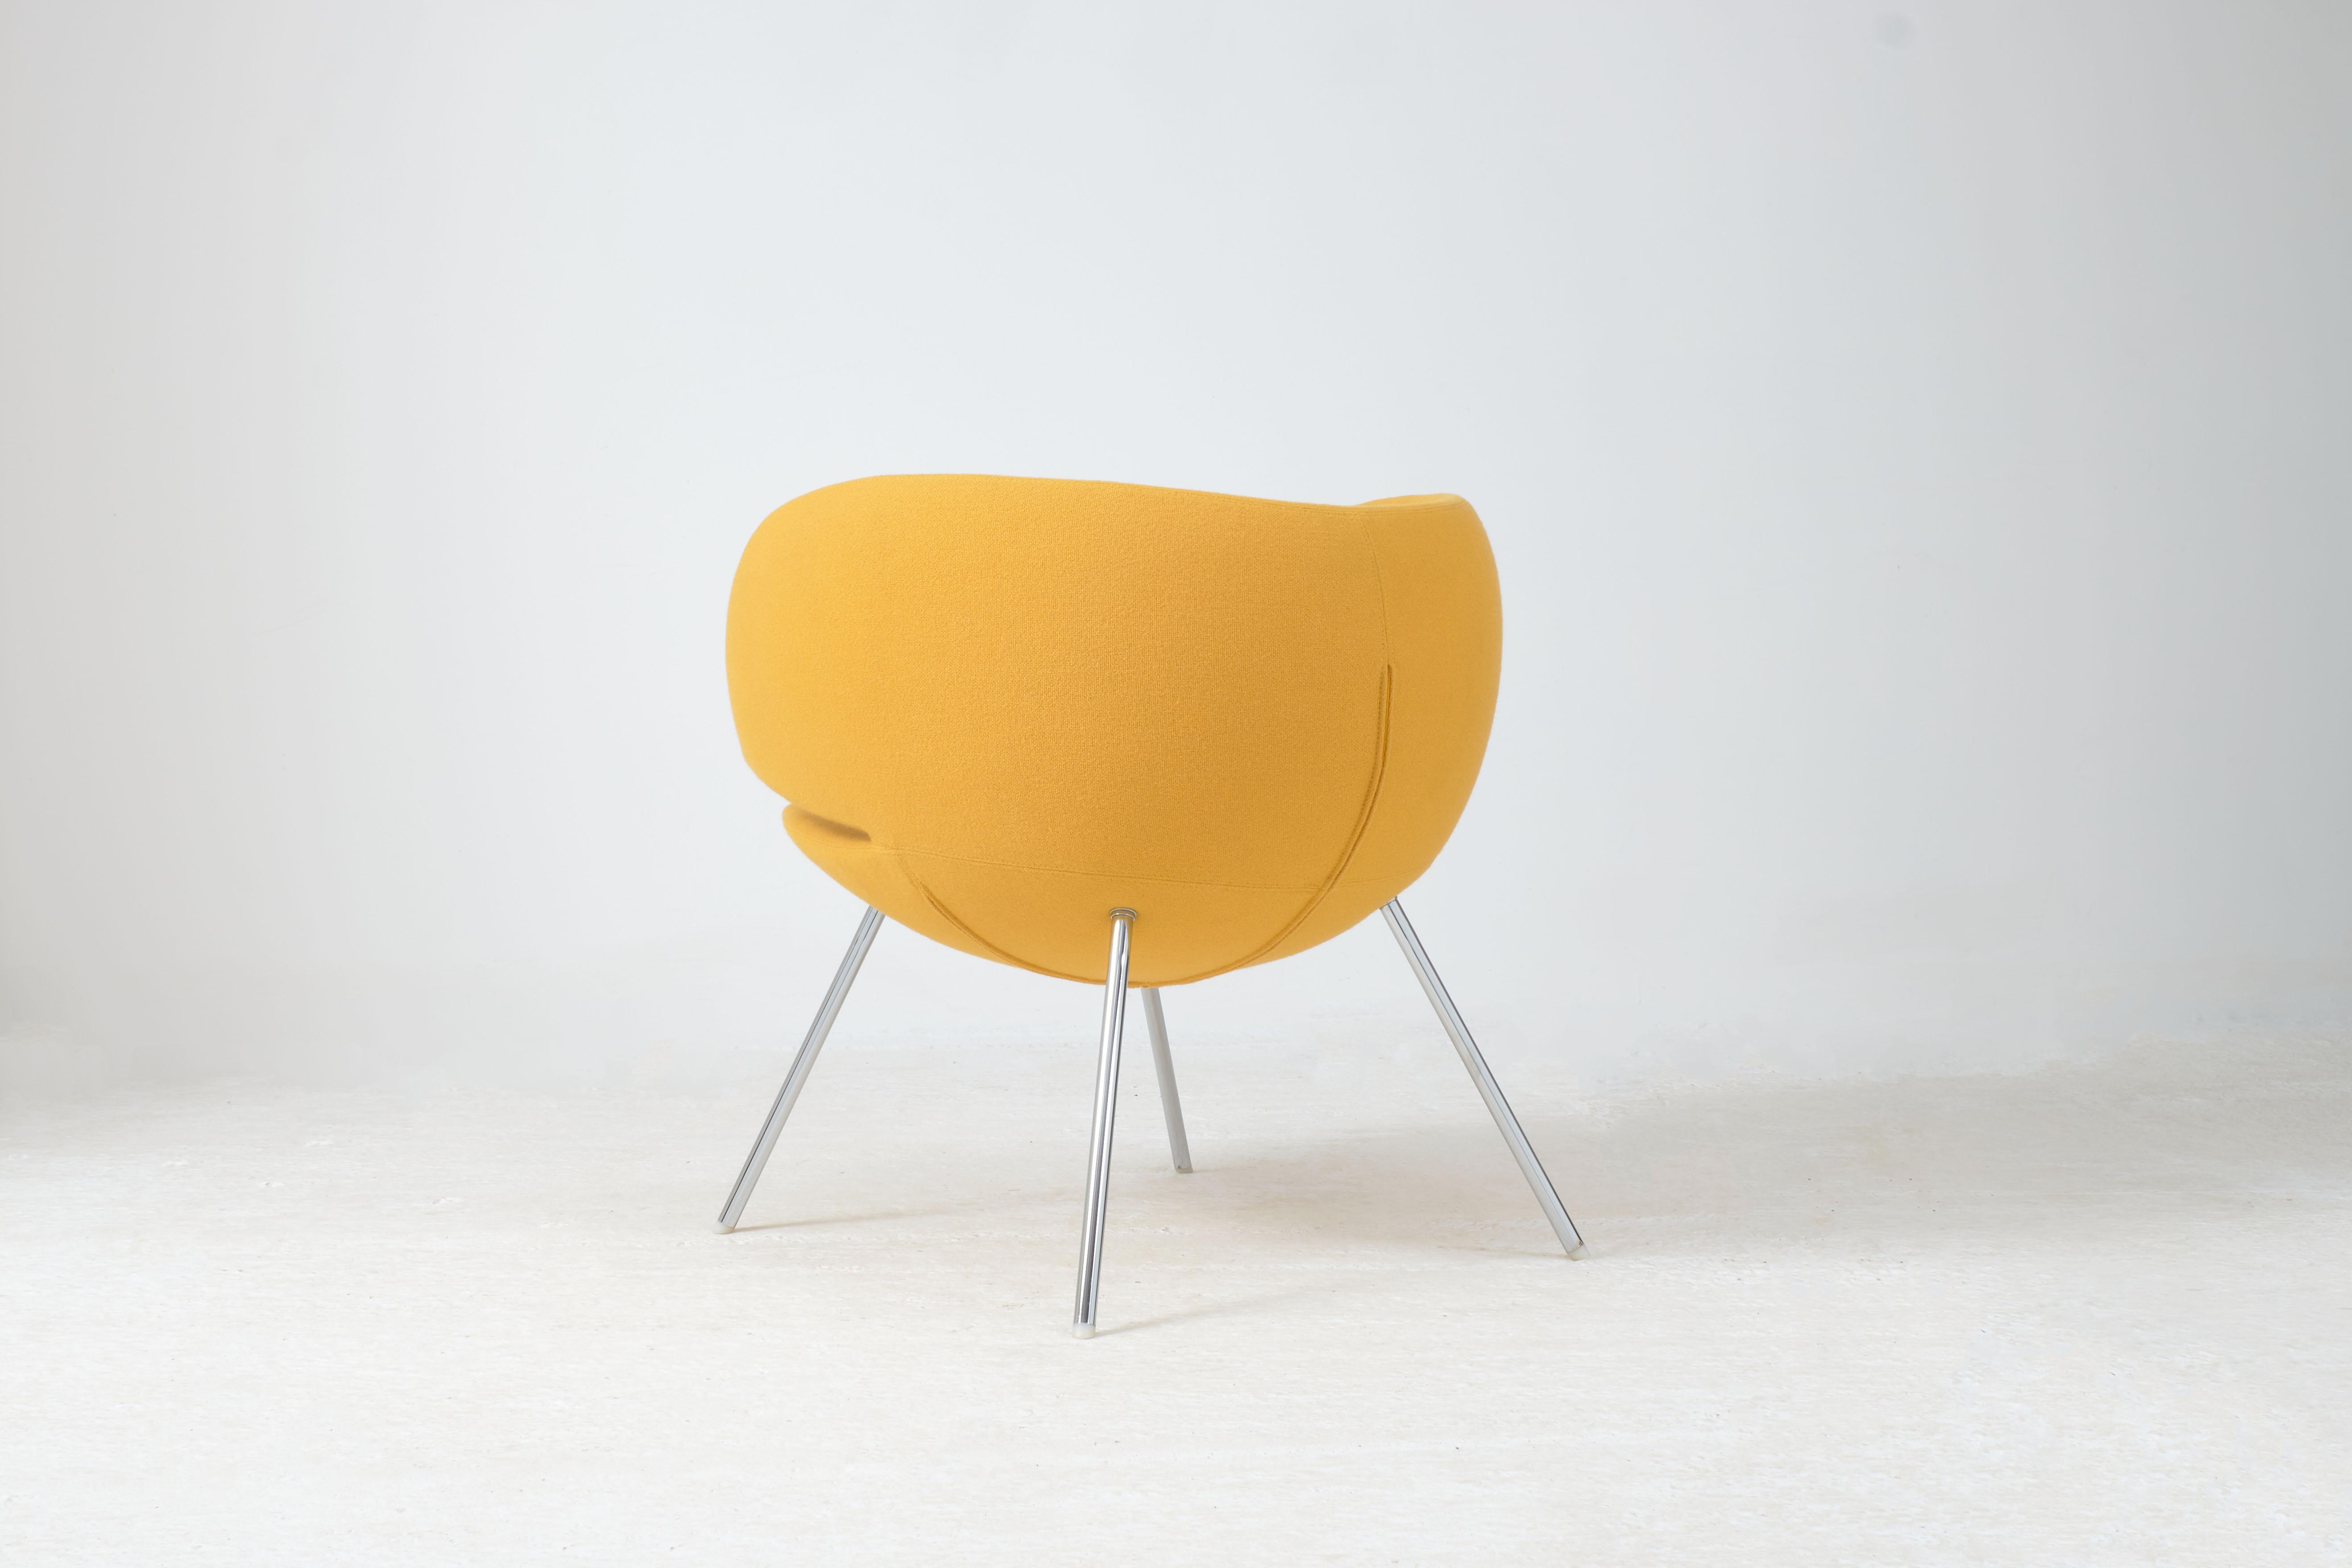 Pinq Lounge chair designed by René Holten for Artifort Circa 2010. Upholstered in a yellow Tonus4 wool by Kvadrat which is in excellent condition. Surprisingly comfortable and extremely decorative.

Dimensions: H72cm D74cm W68cm SH42cm